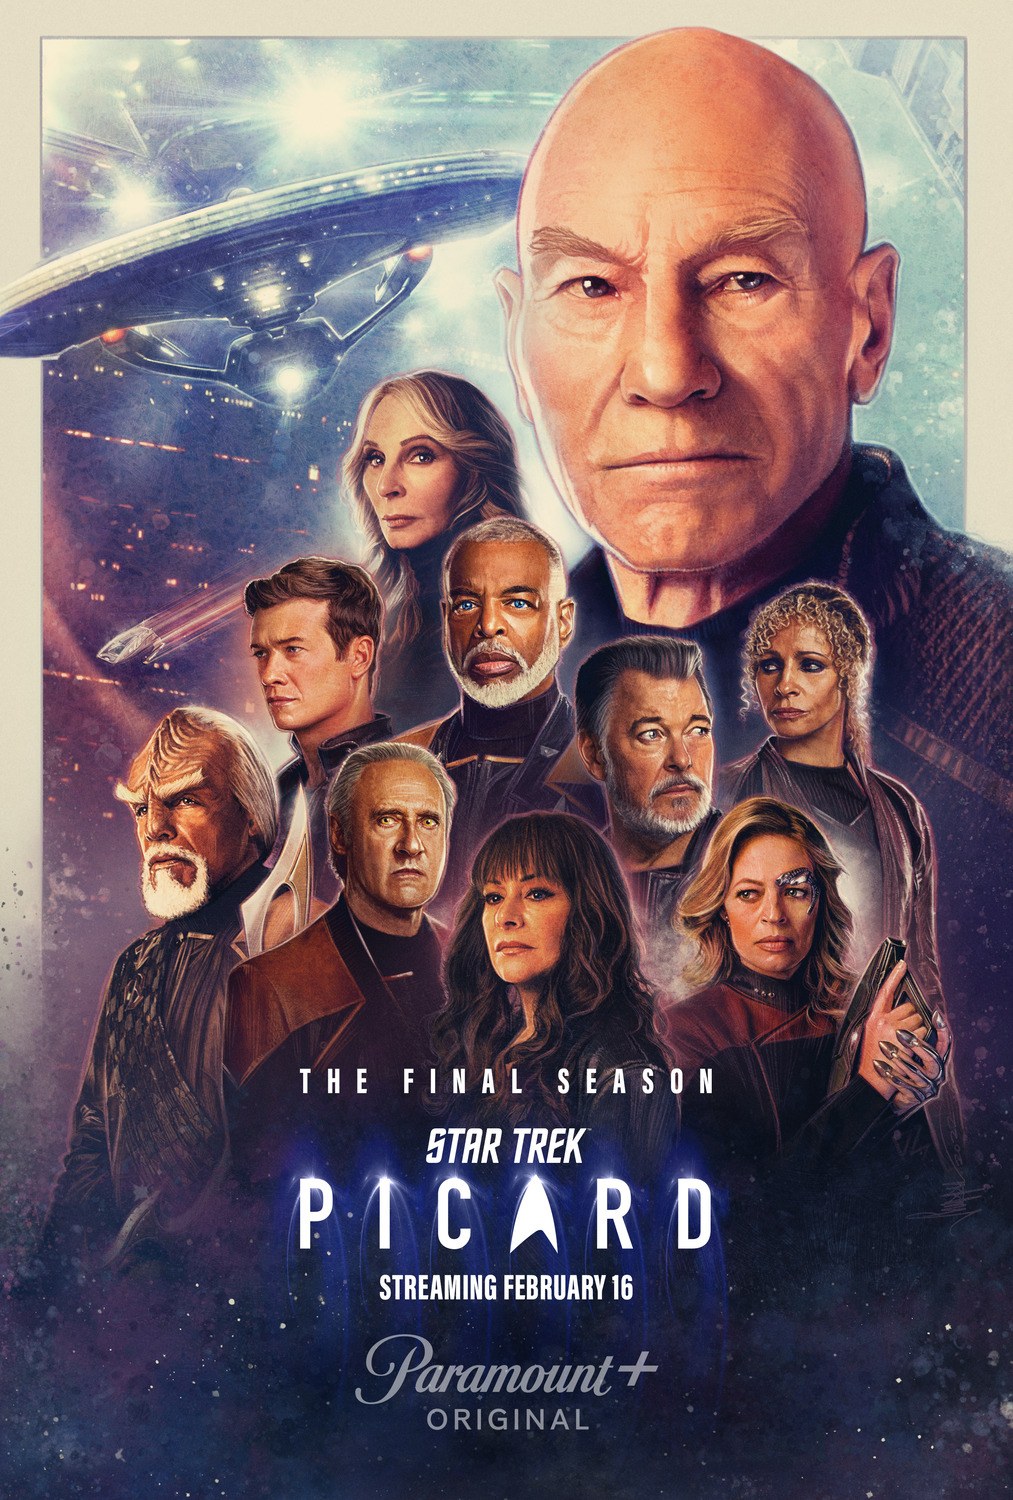 Star Trek Picard Episode 310 “the Last Generation” Movieguide Movie Reviews For Families